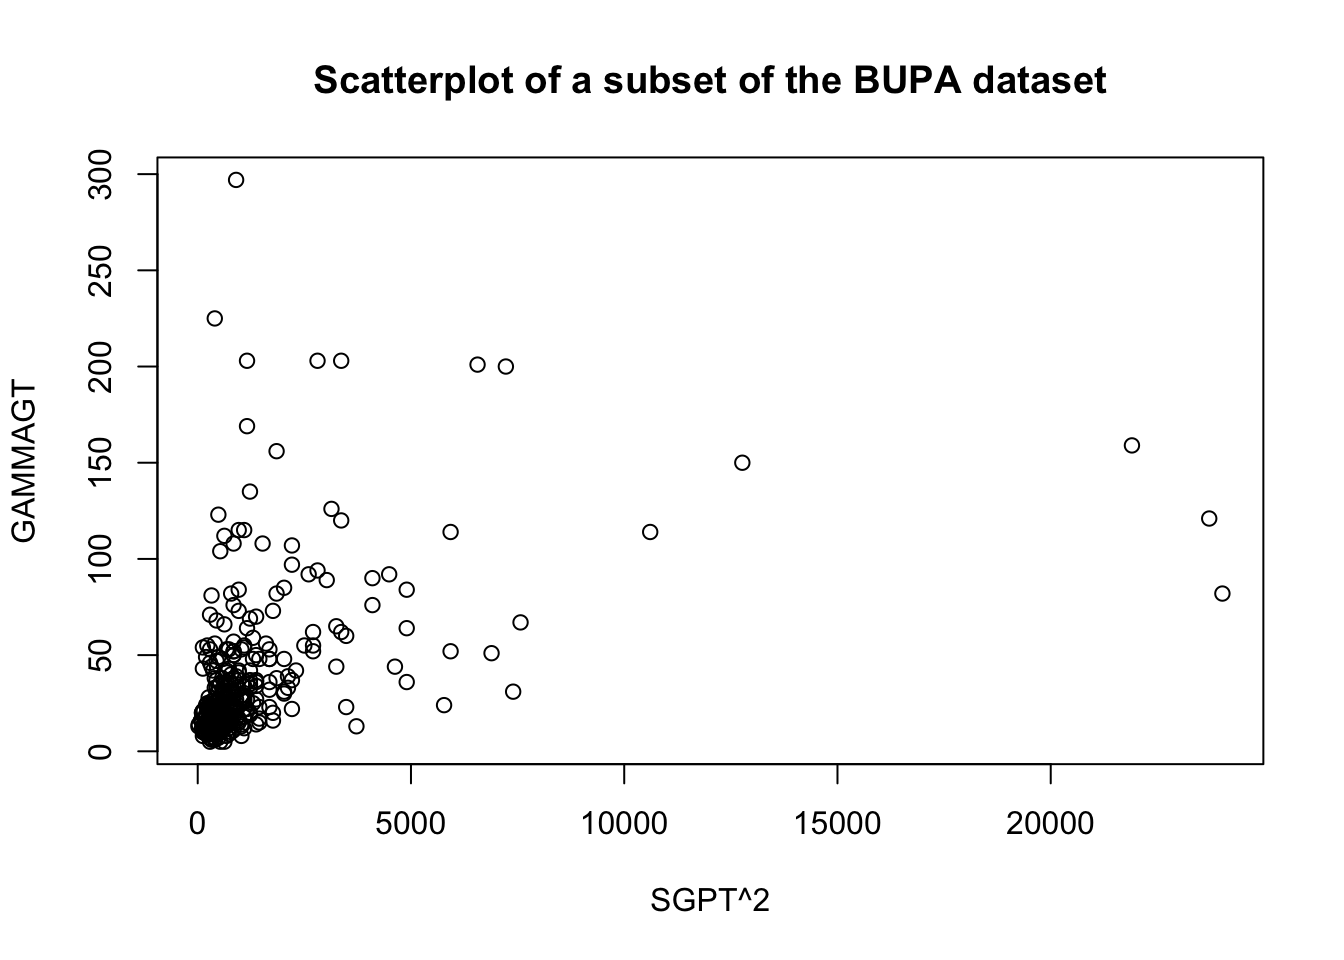 Various data transformations for a subset of the BUPA liver diease dataset.